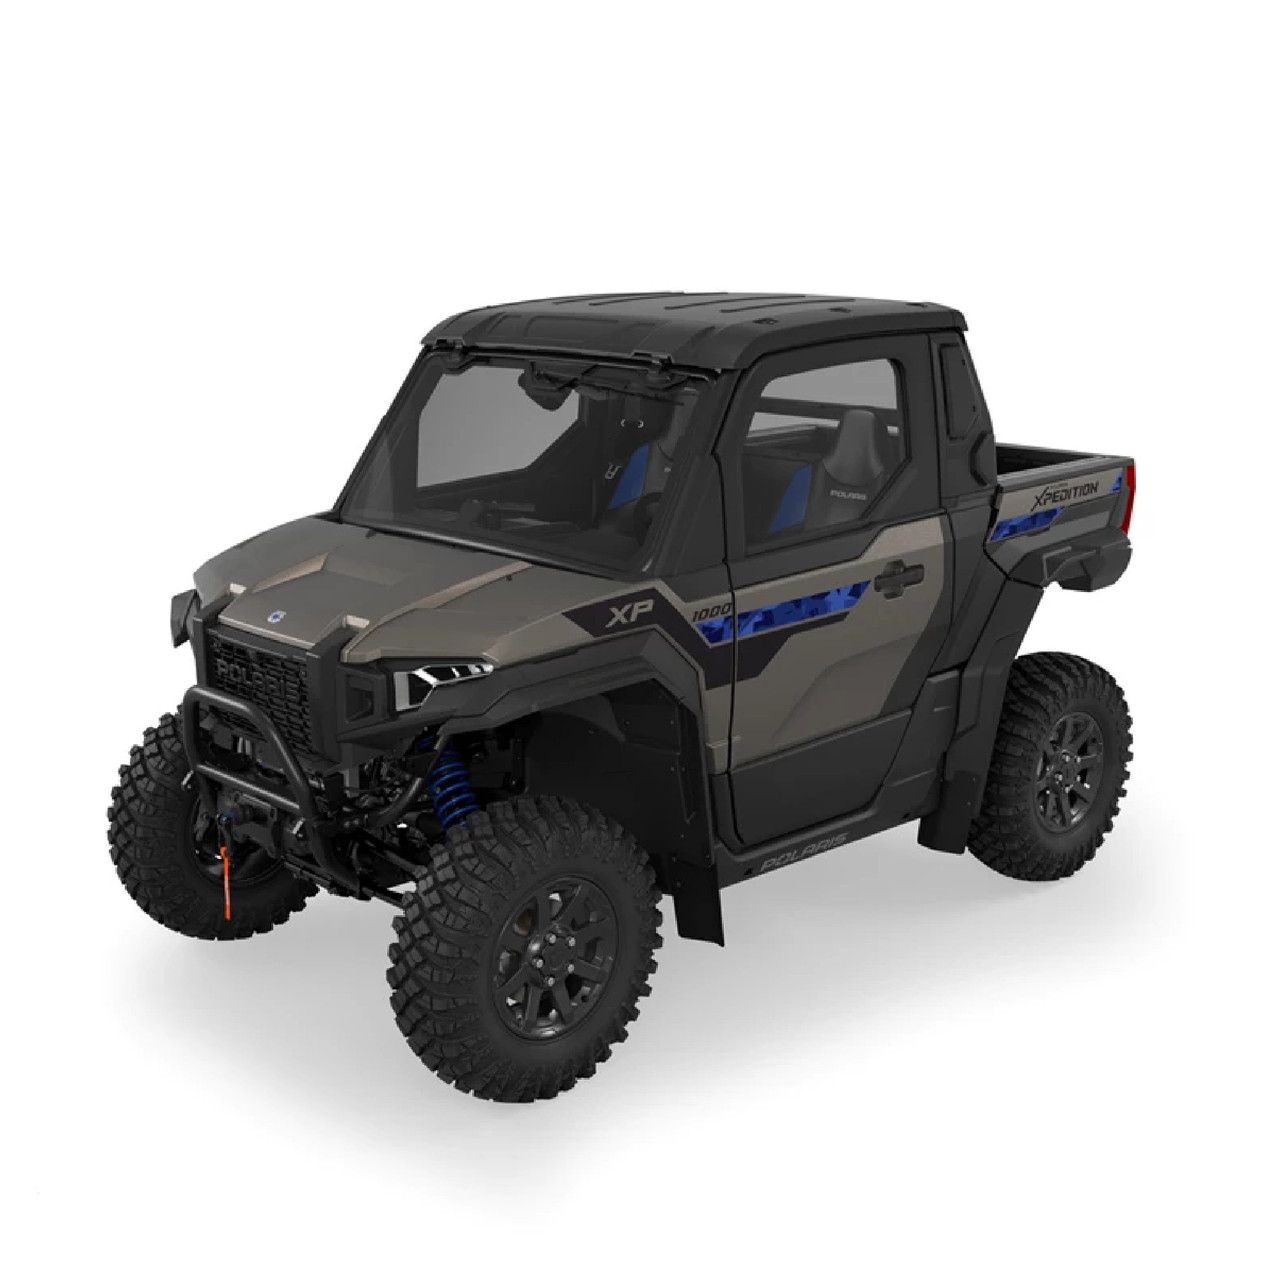 Polaris New OEM, Full Coverage Fender Flares from Mud and Other Debris, 2890638